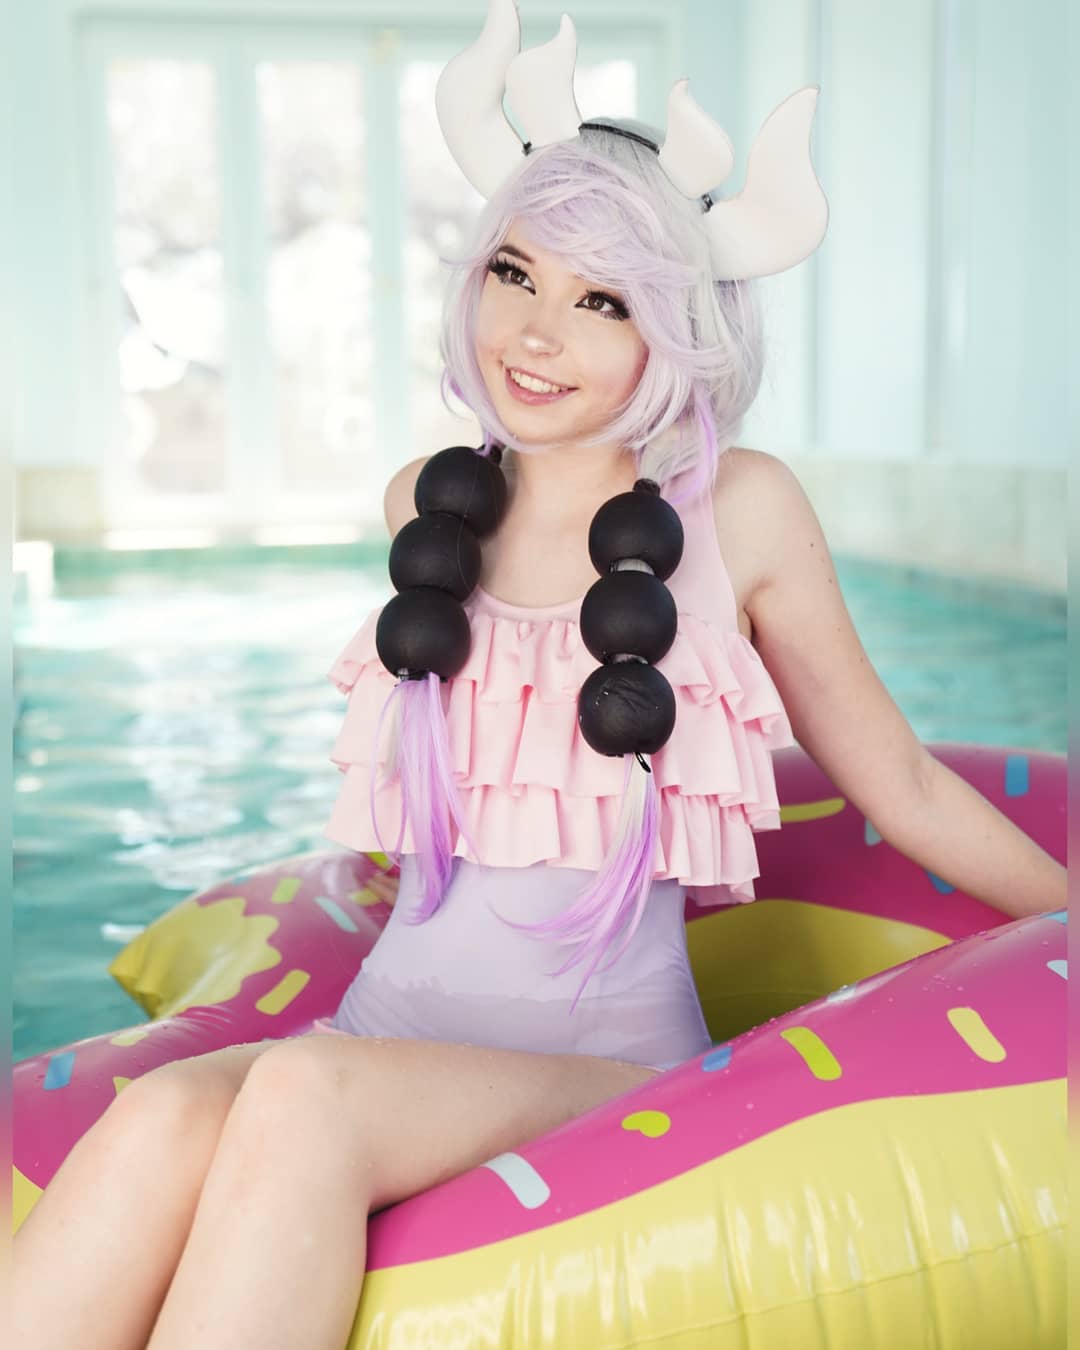 80+ Hot Pictures Of Belle Delphine Which Will Make Your Mouth Water | Best Of Comic Books